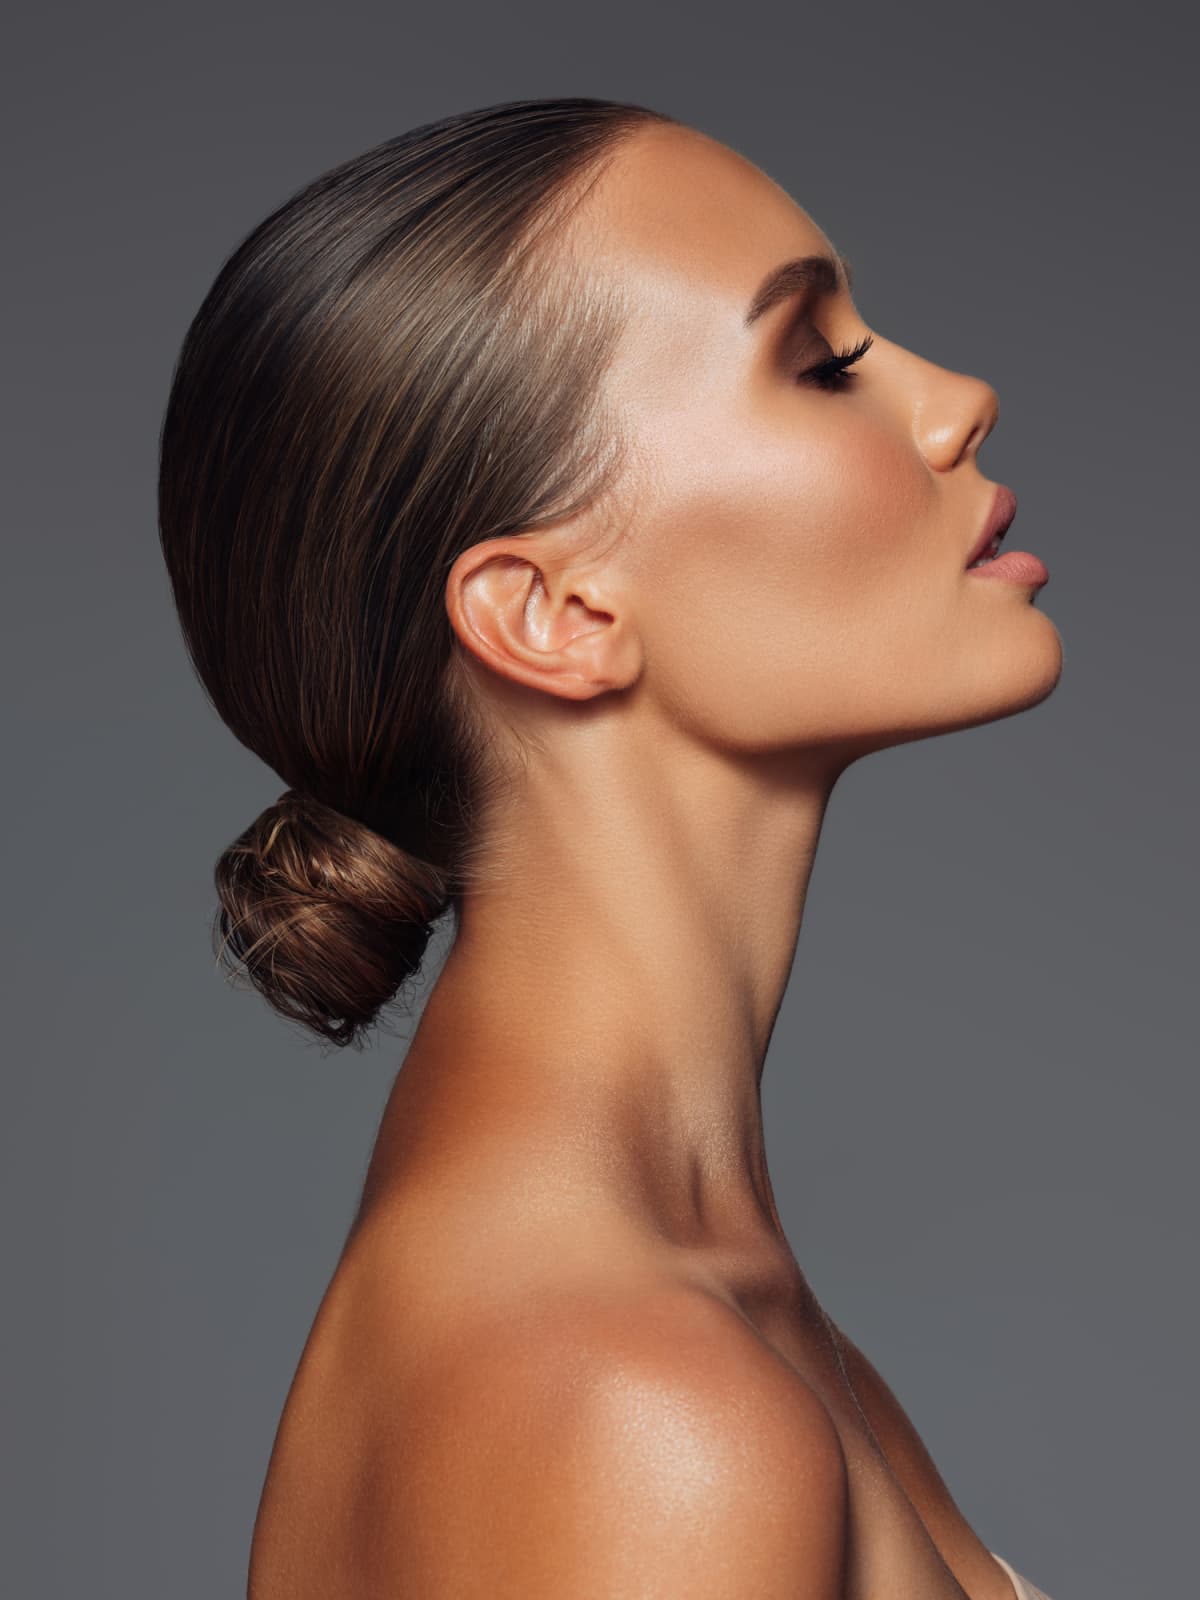 A woman with glowing skin and shiny hair in profile